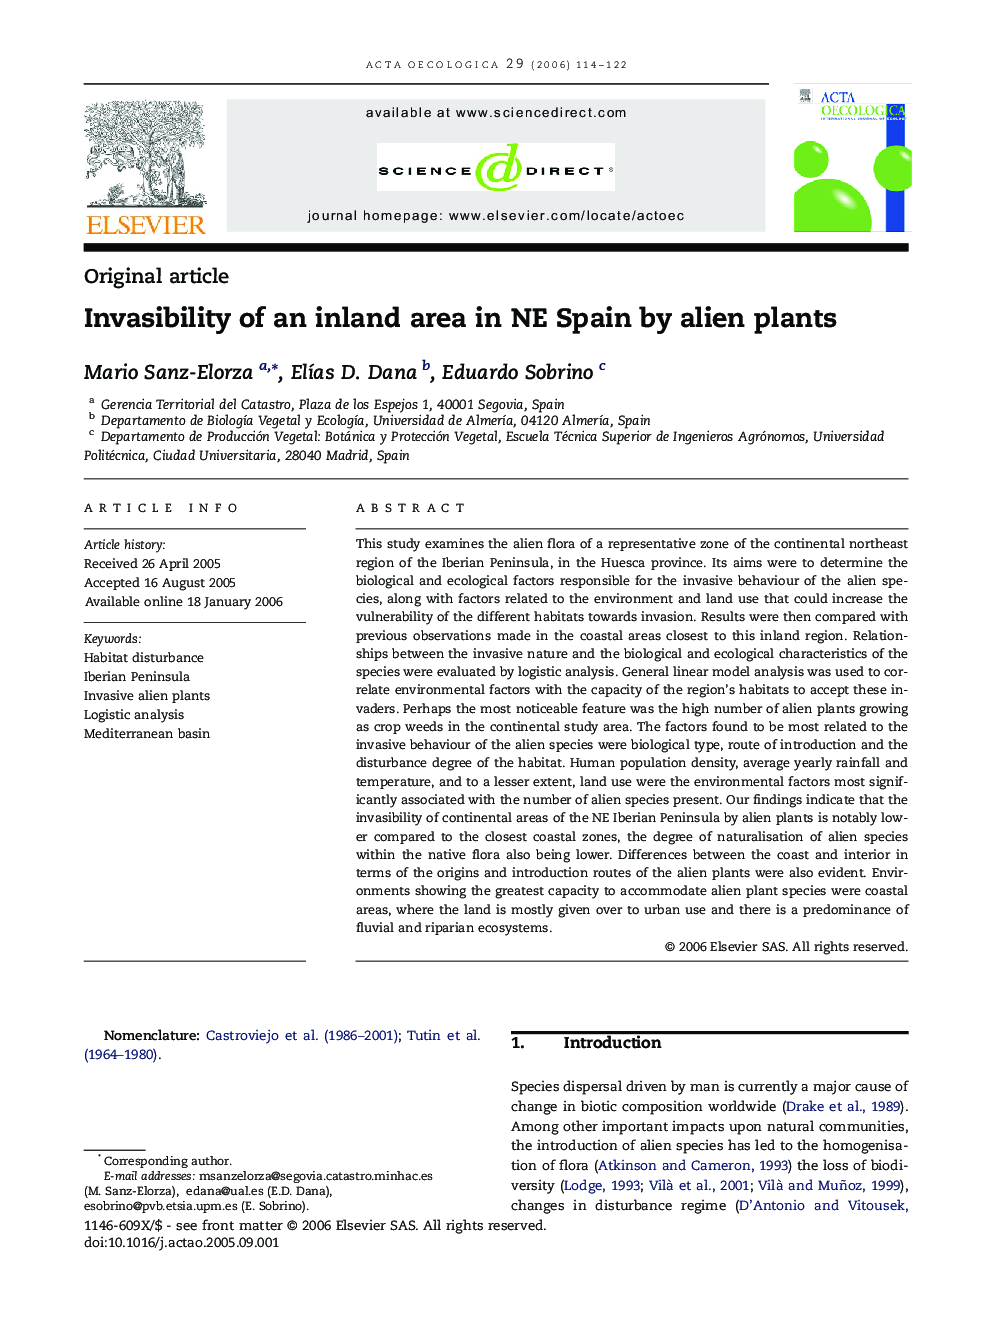 Invasibility of an inland area in NE Spain by alien plants